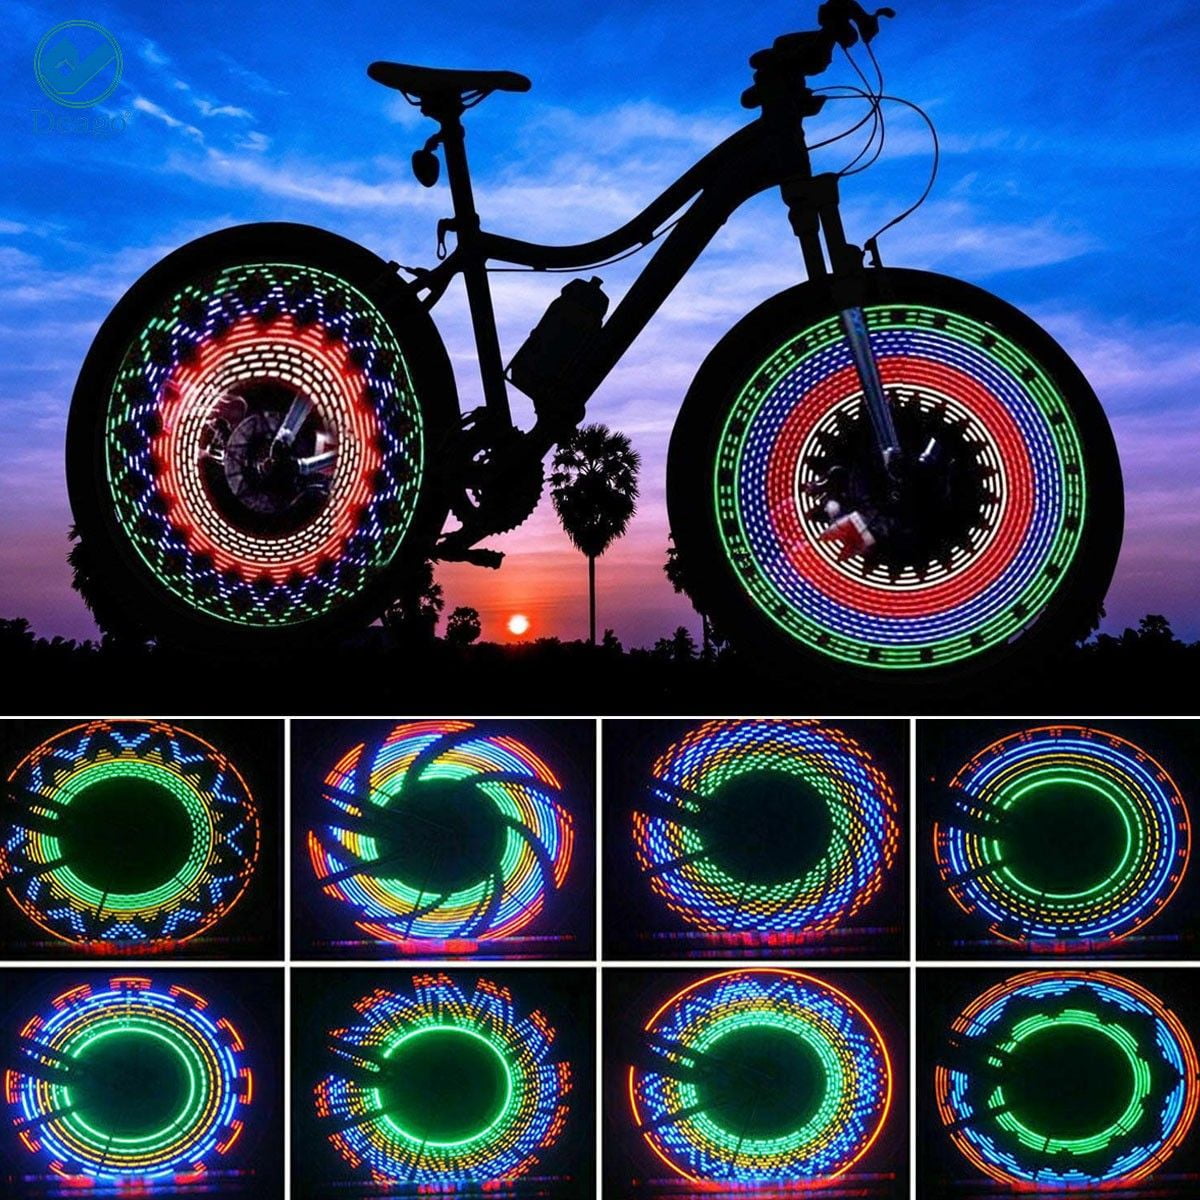 Details about   LED Bicycle Bike Cycling Rim String Lights Open & Close Wheel Spoke Waterproof ^ 